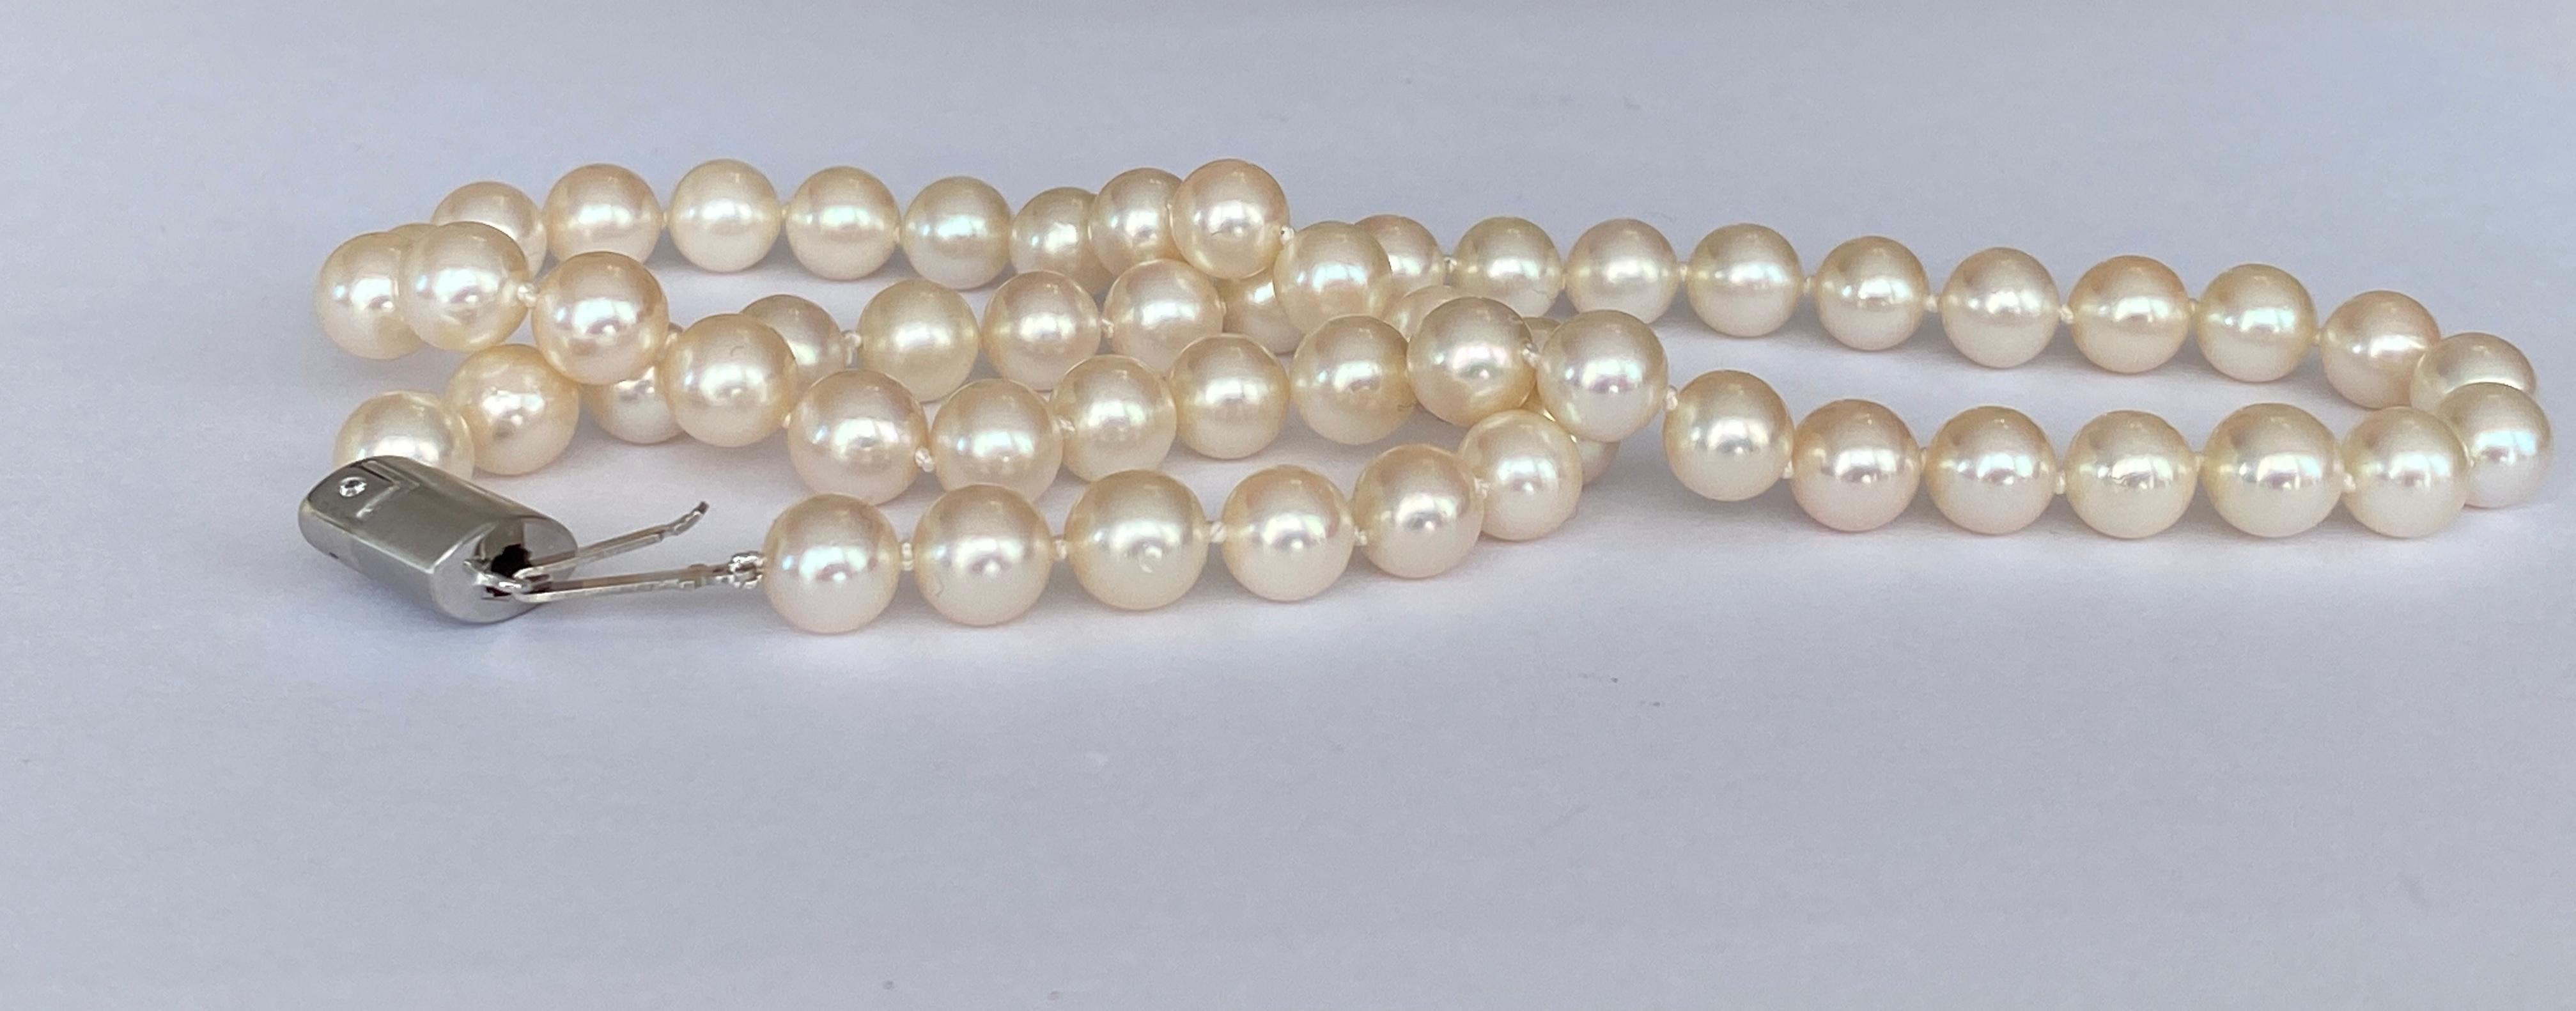 Akoya pearl necklace with 18 kt white gold clasp and one diamond For Sale 2